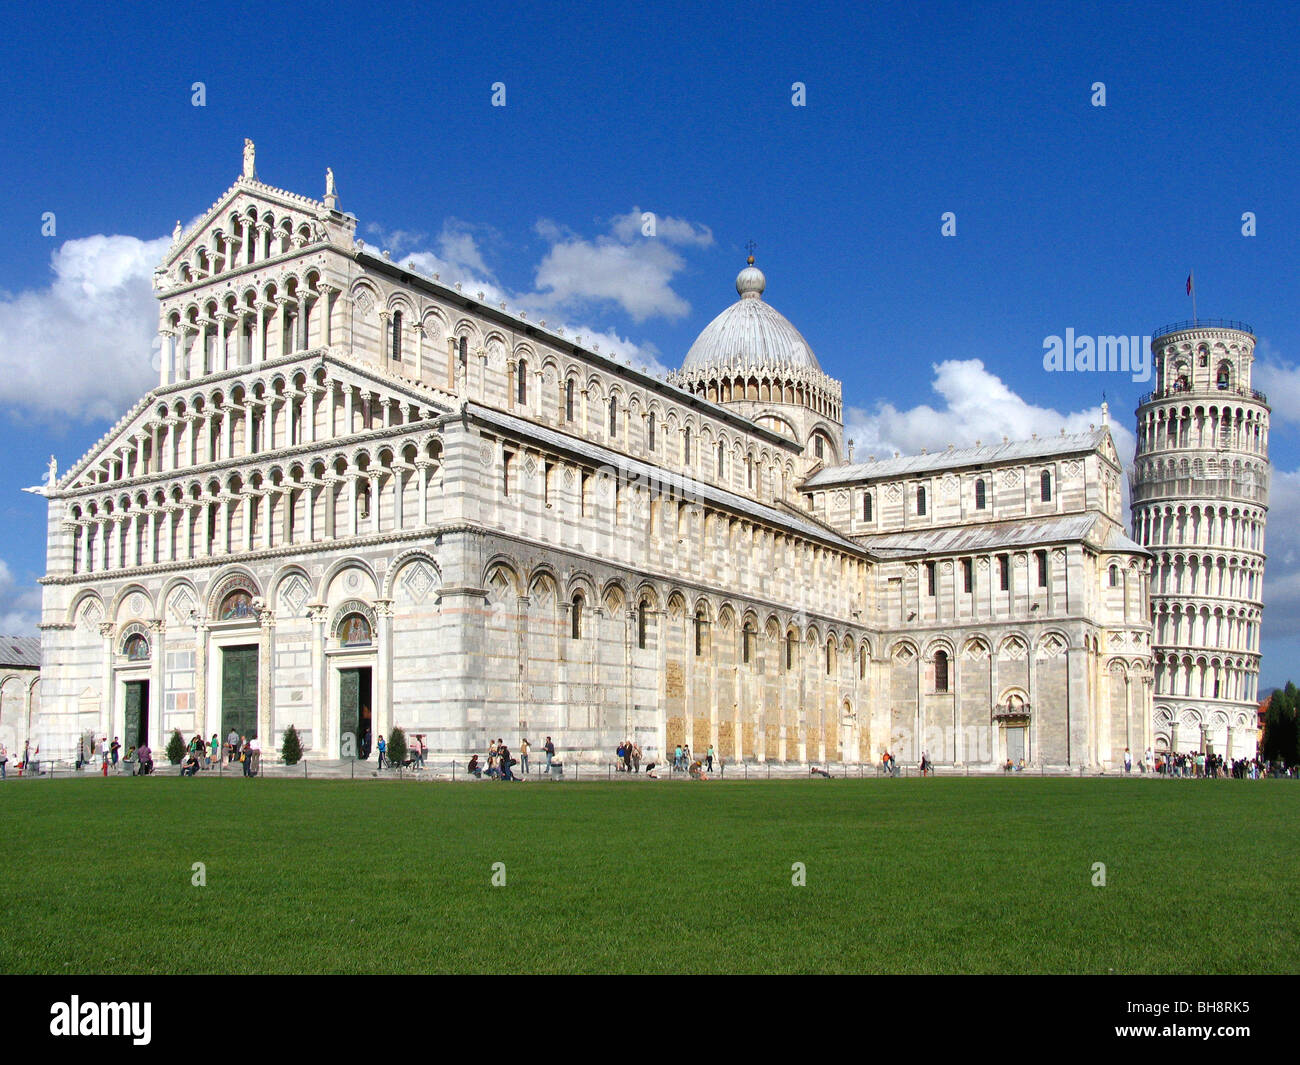 Italy, Tuscany, Leaning Tower of Pisa Stock Photo